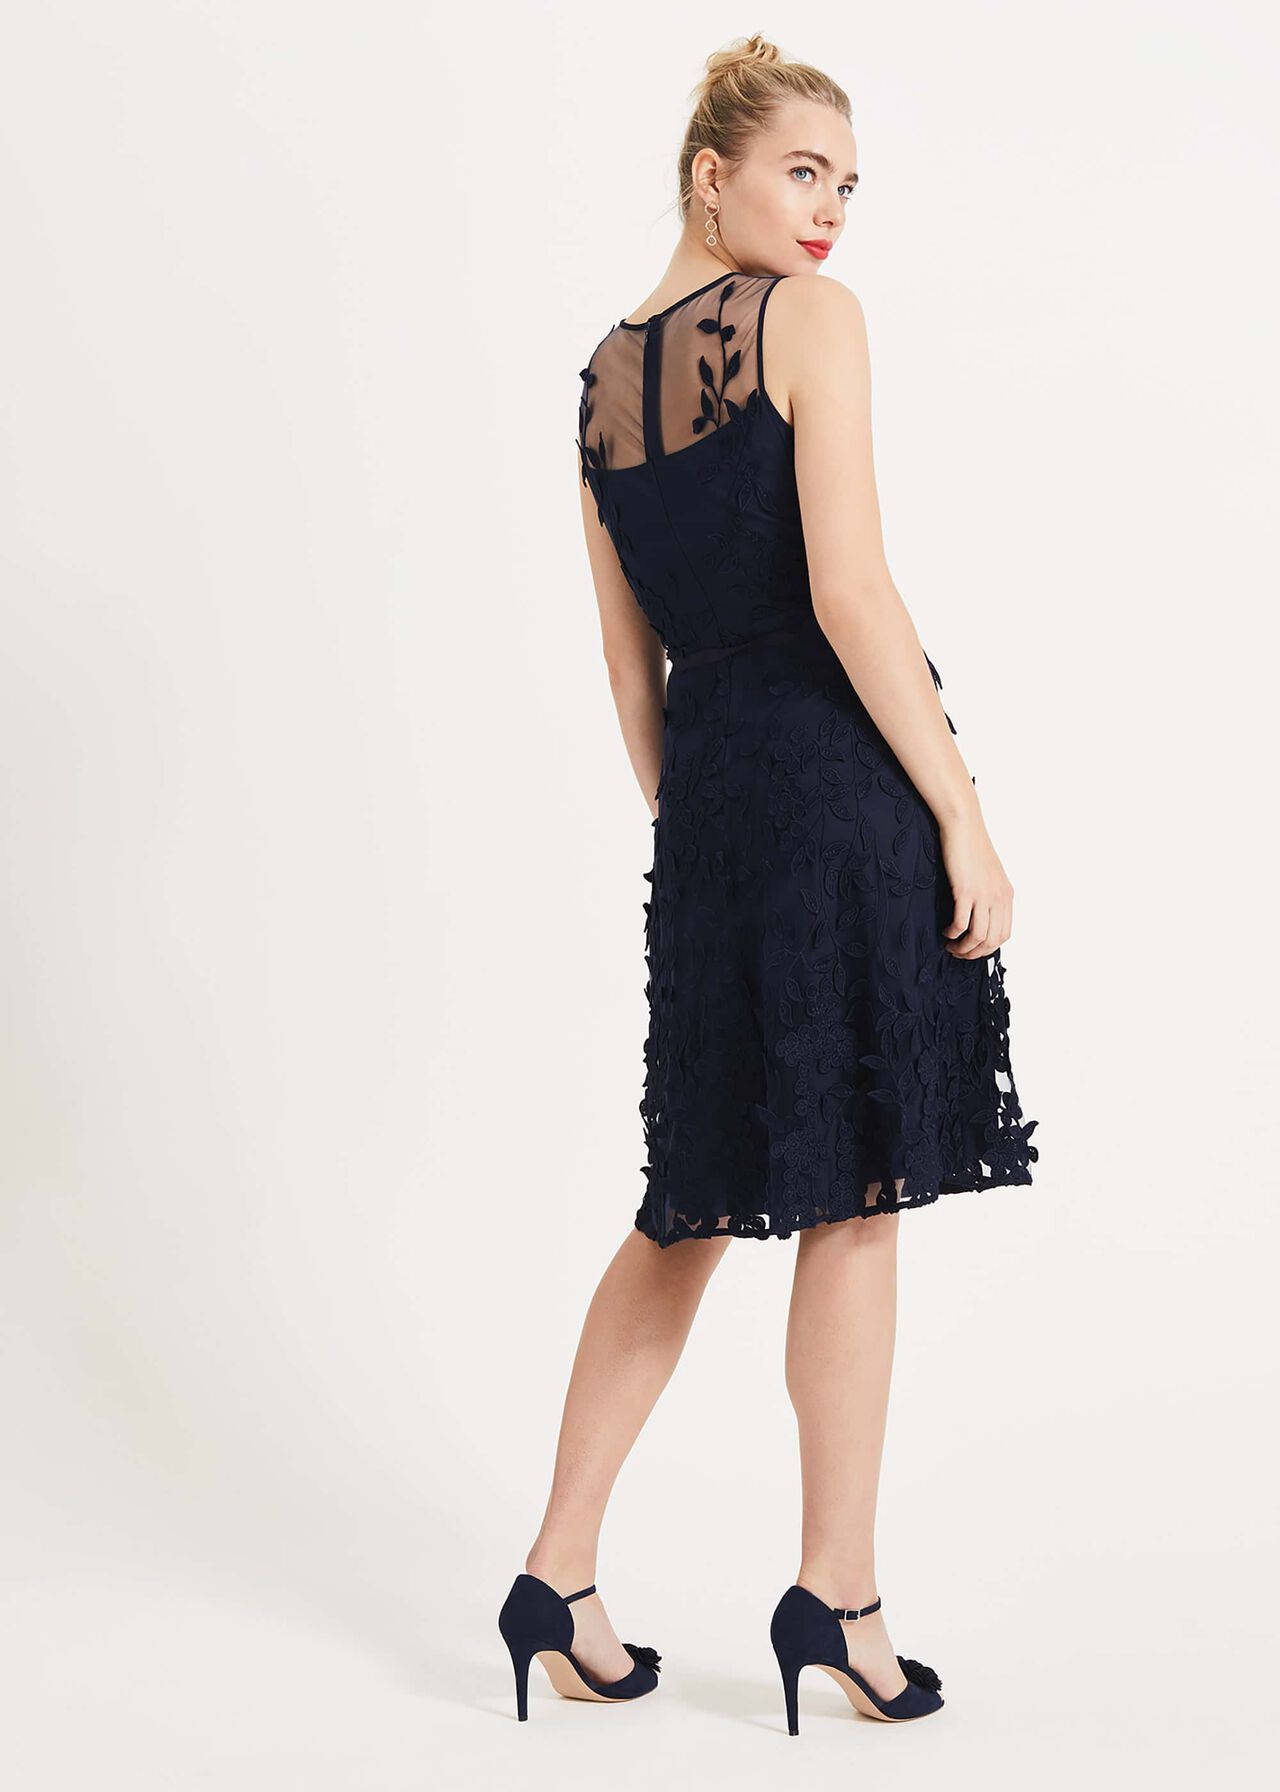 Kenzie Embroidered Dress